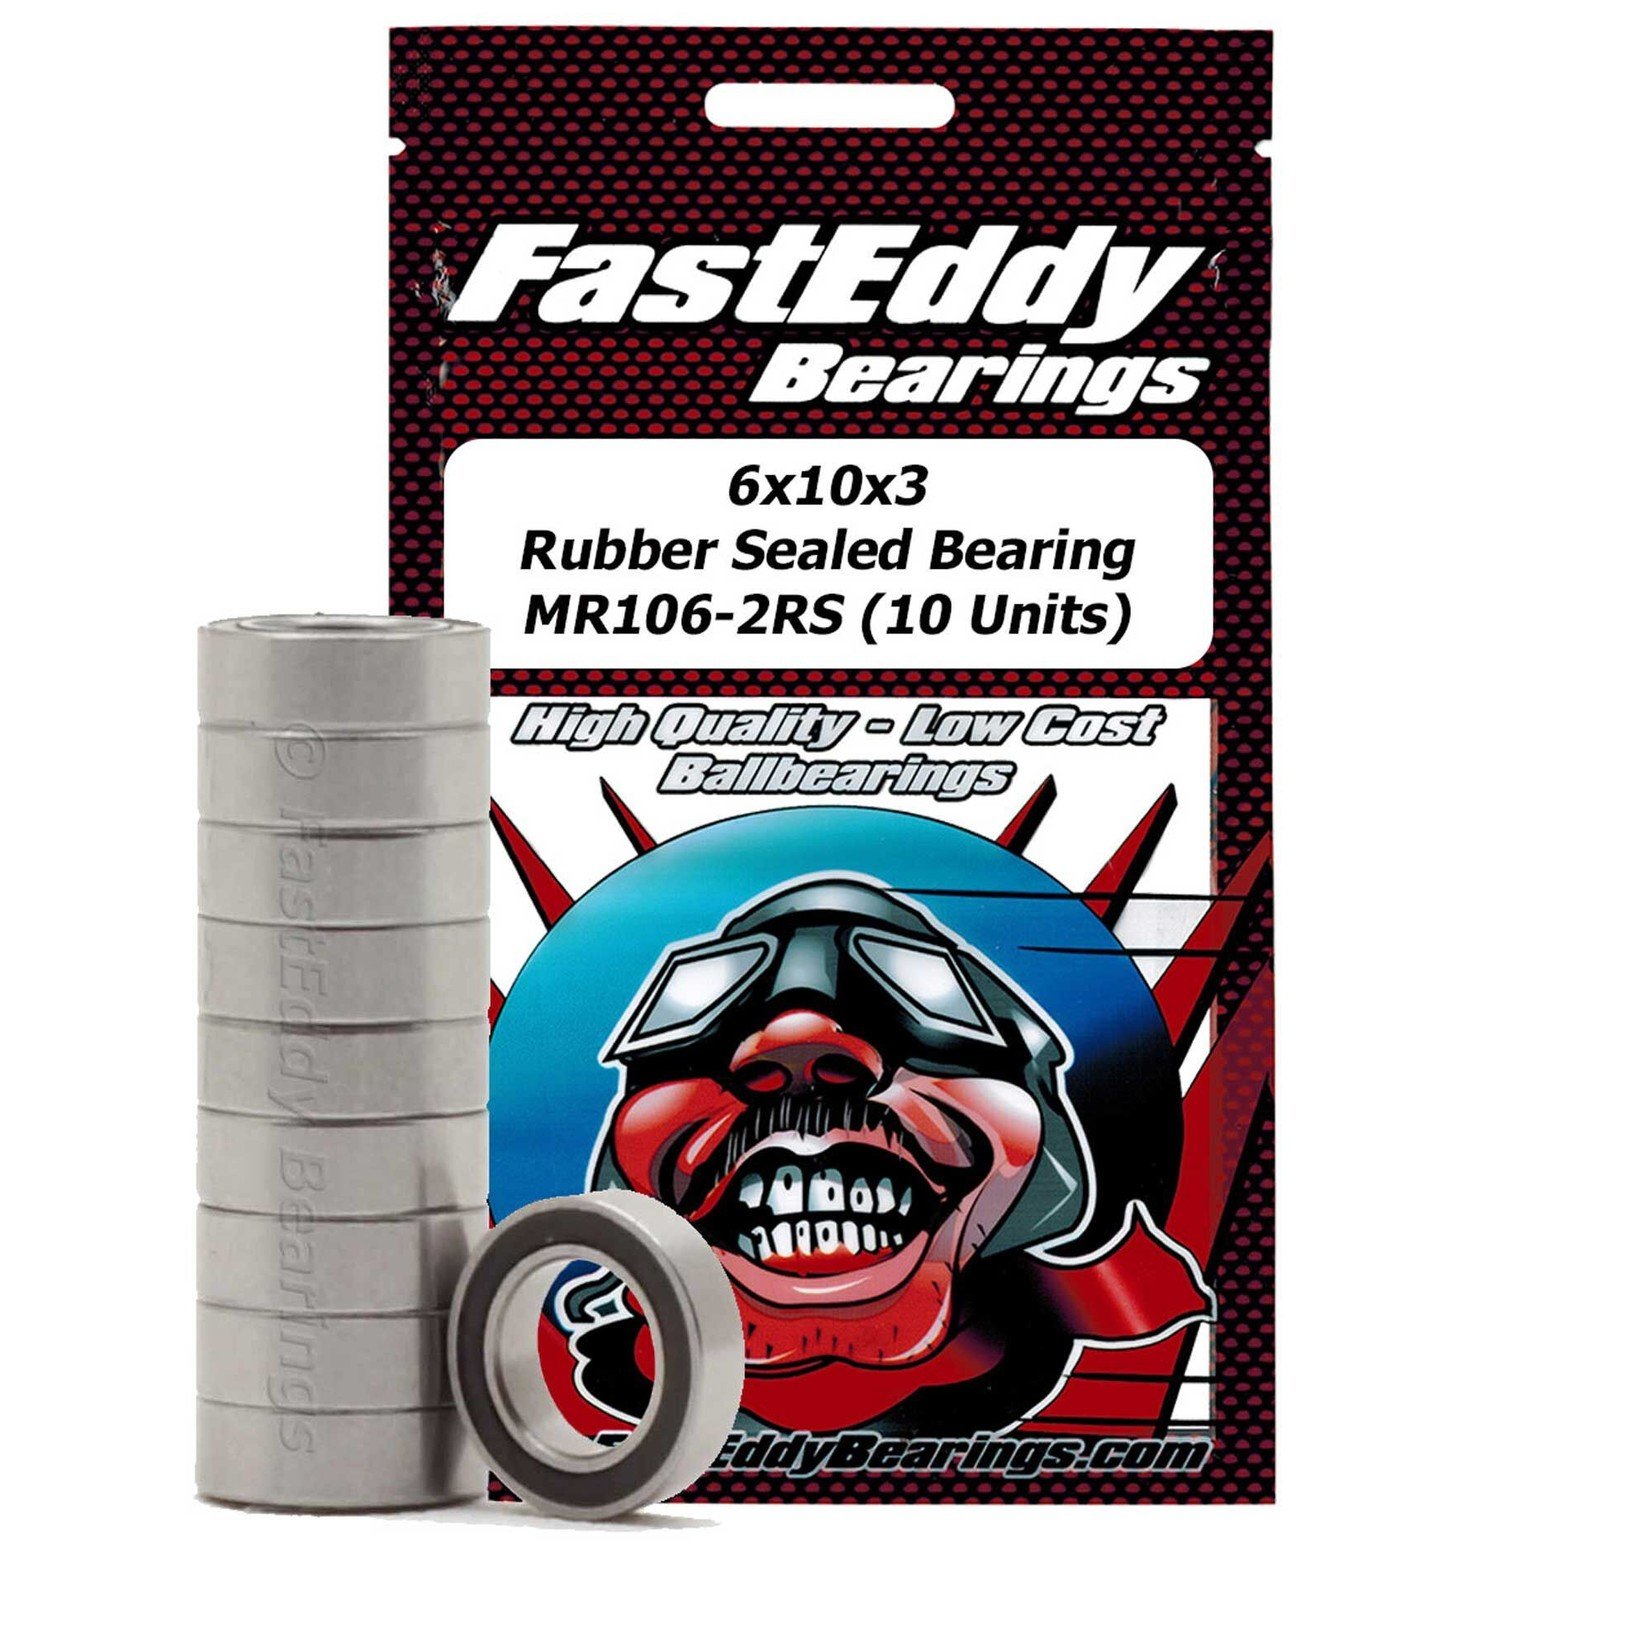 Fast Eddy 6x10x3 Rubber Sealed Bearing, MR106-2RS (10)